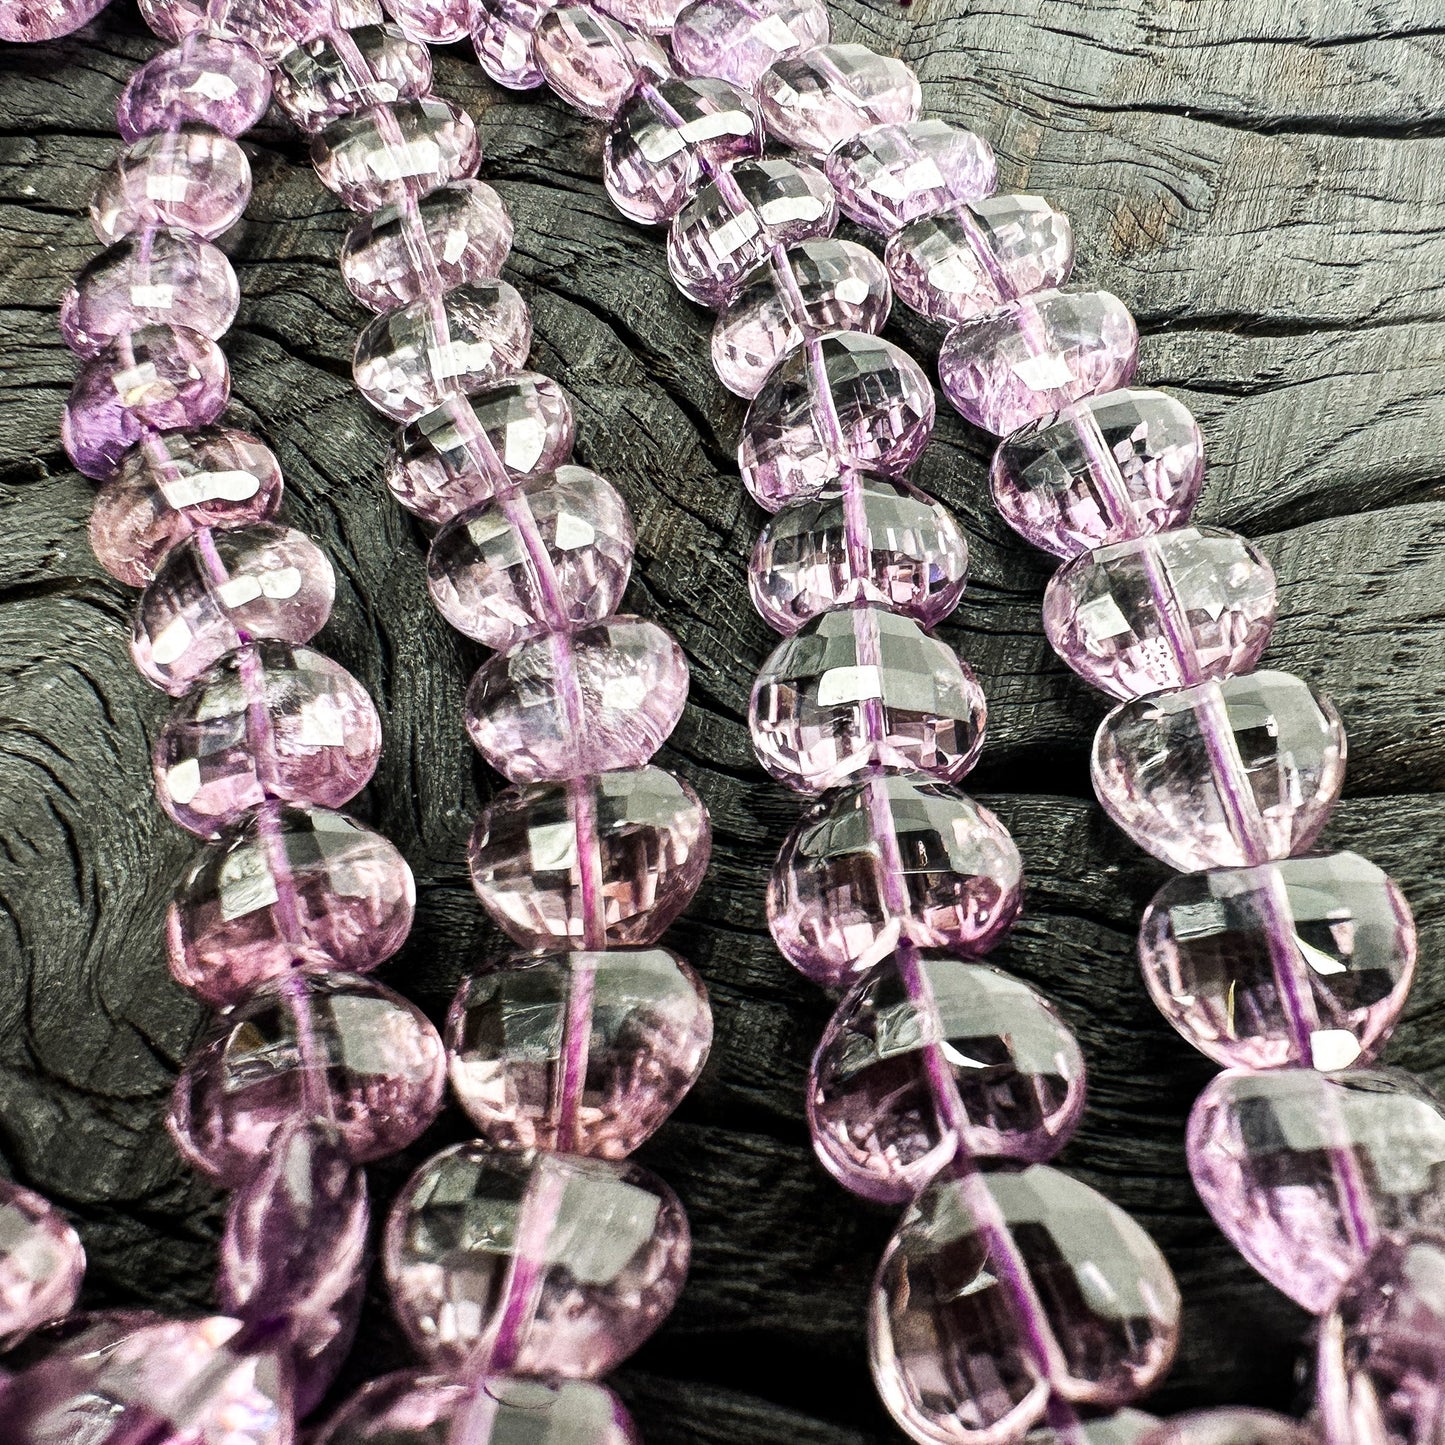 Amethyst 12mm Faceted Heart Bead - 1 pc.-The Bead Gallery Honolulu